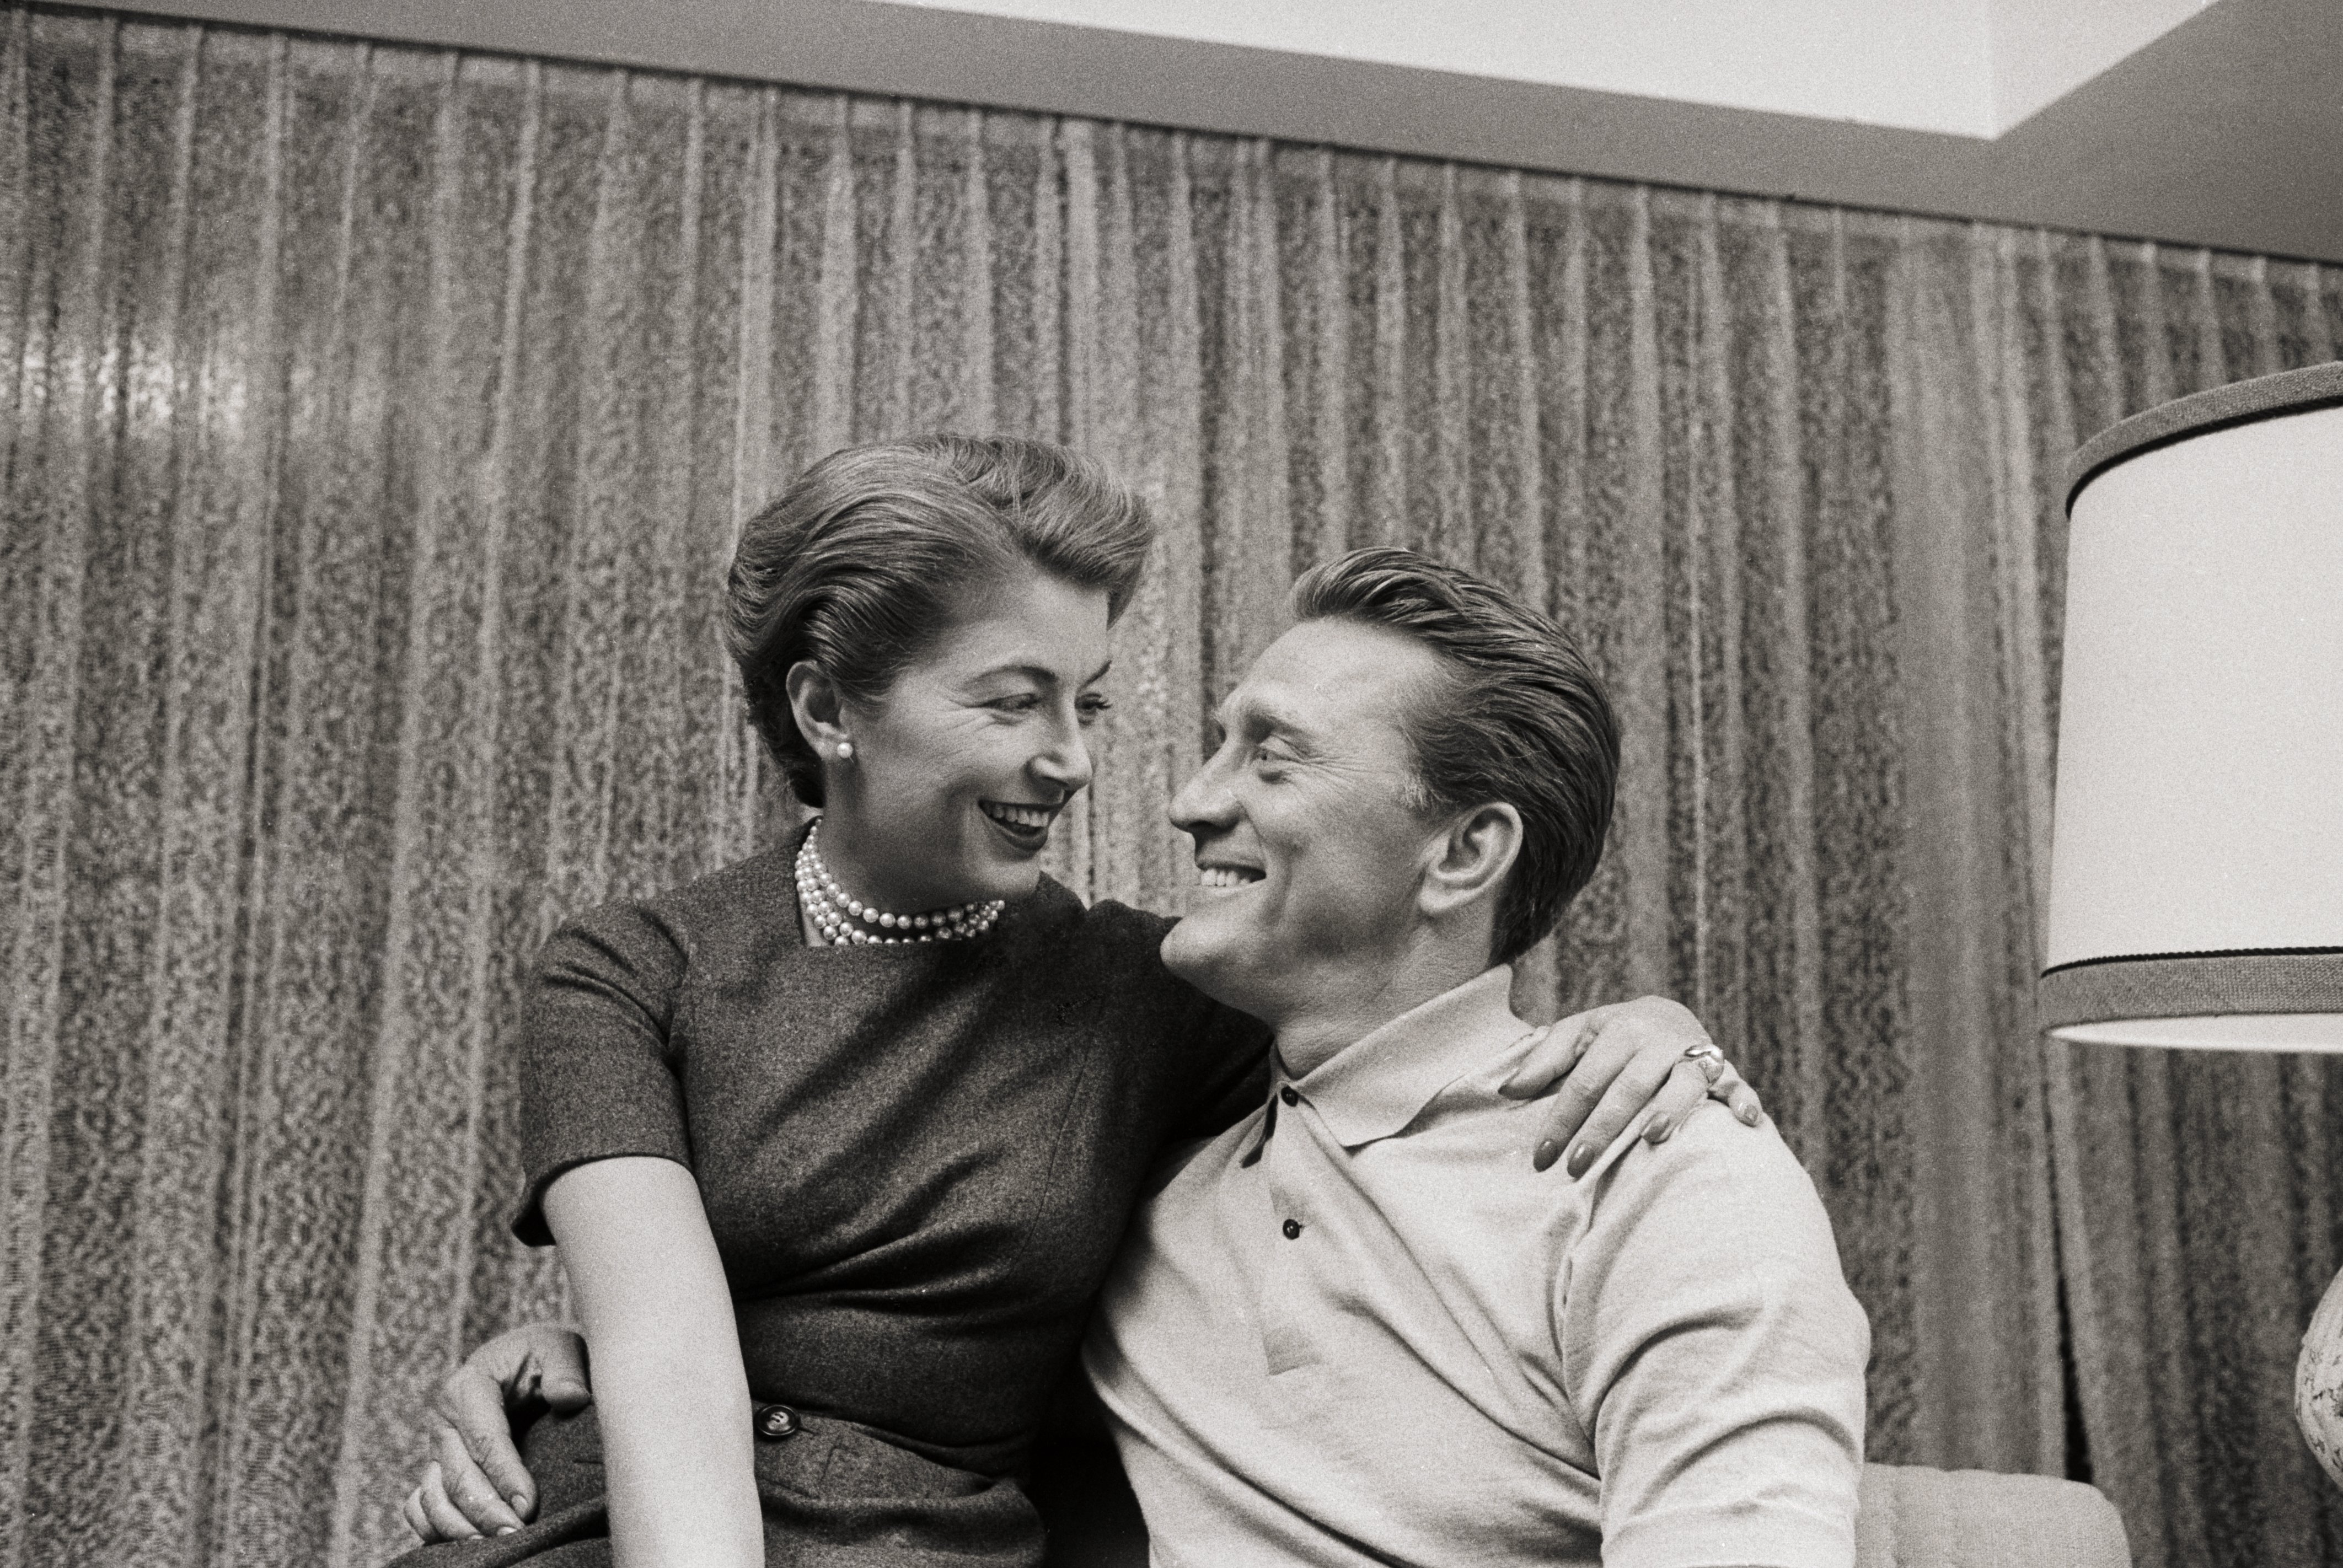 Kirk Douglas and his spouse Anne Douglas gaze at each other in a portrait photo. | Source: Getty Images